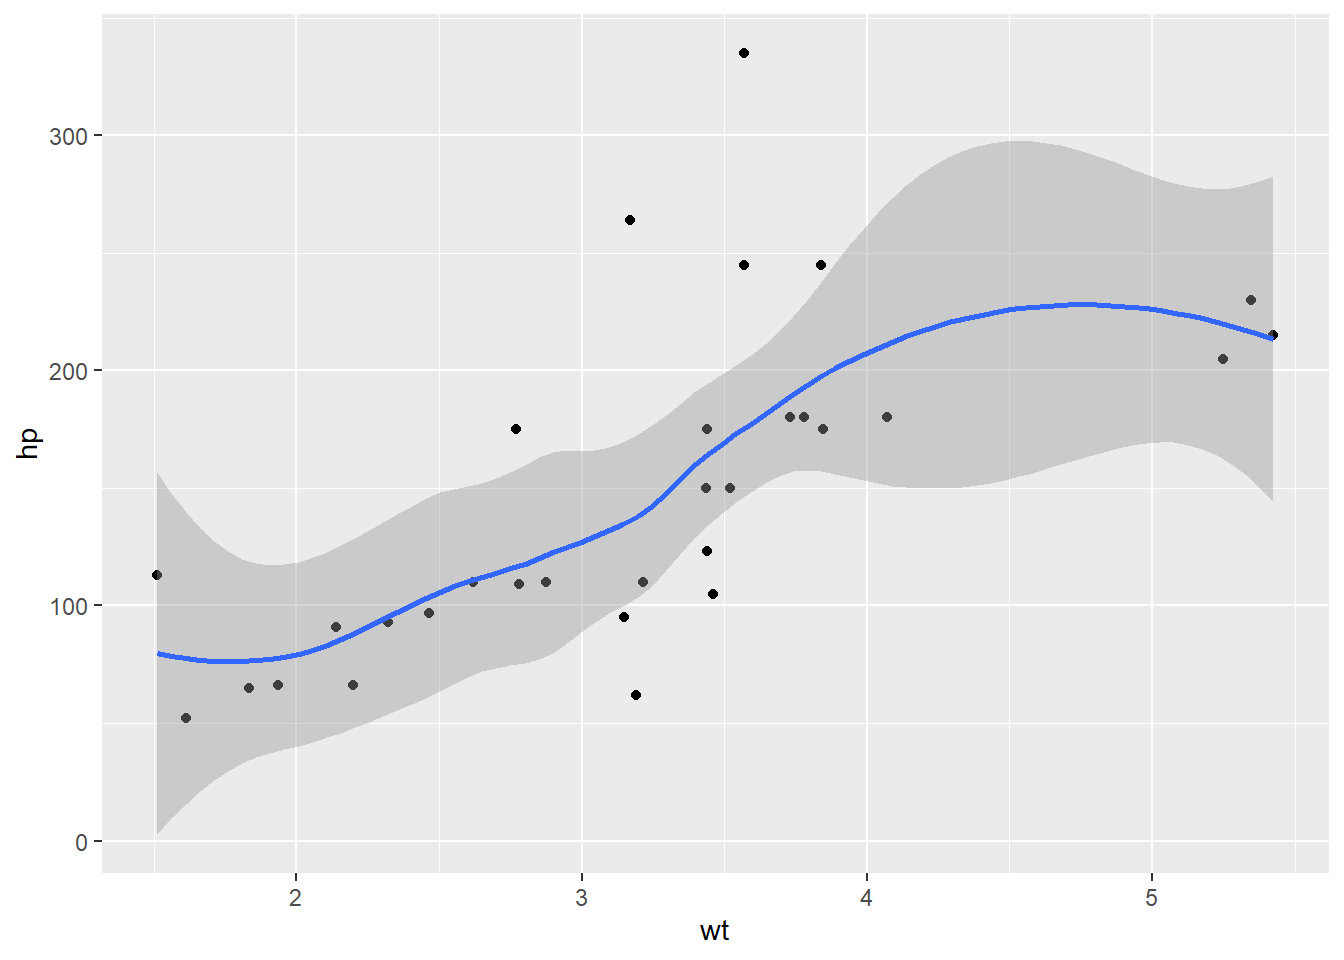 How To Add A Regression Line To A Ggplot